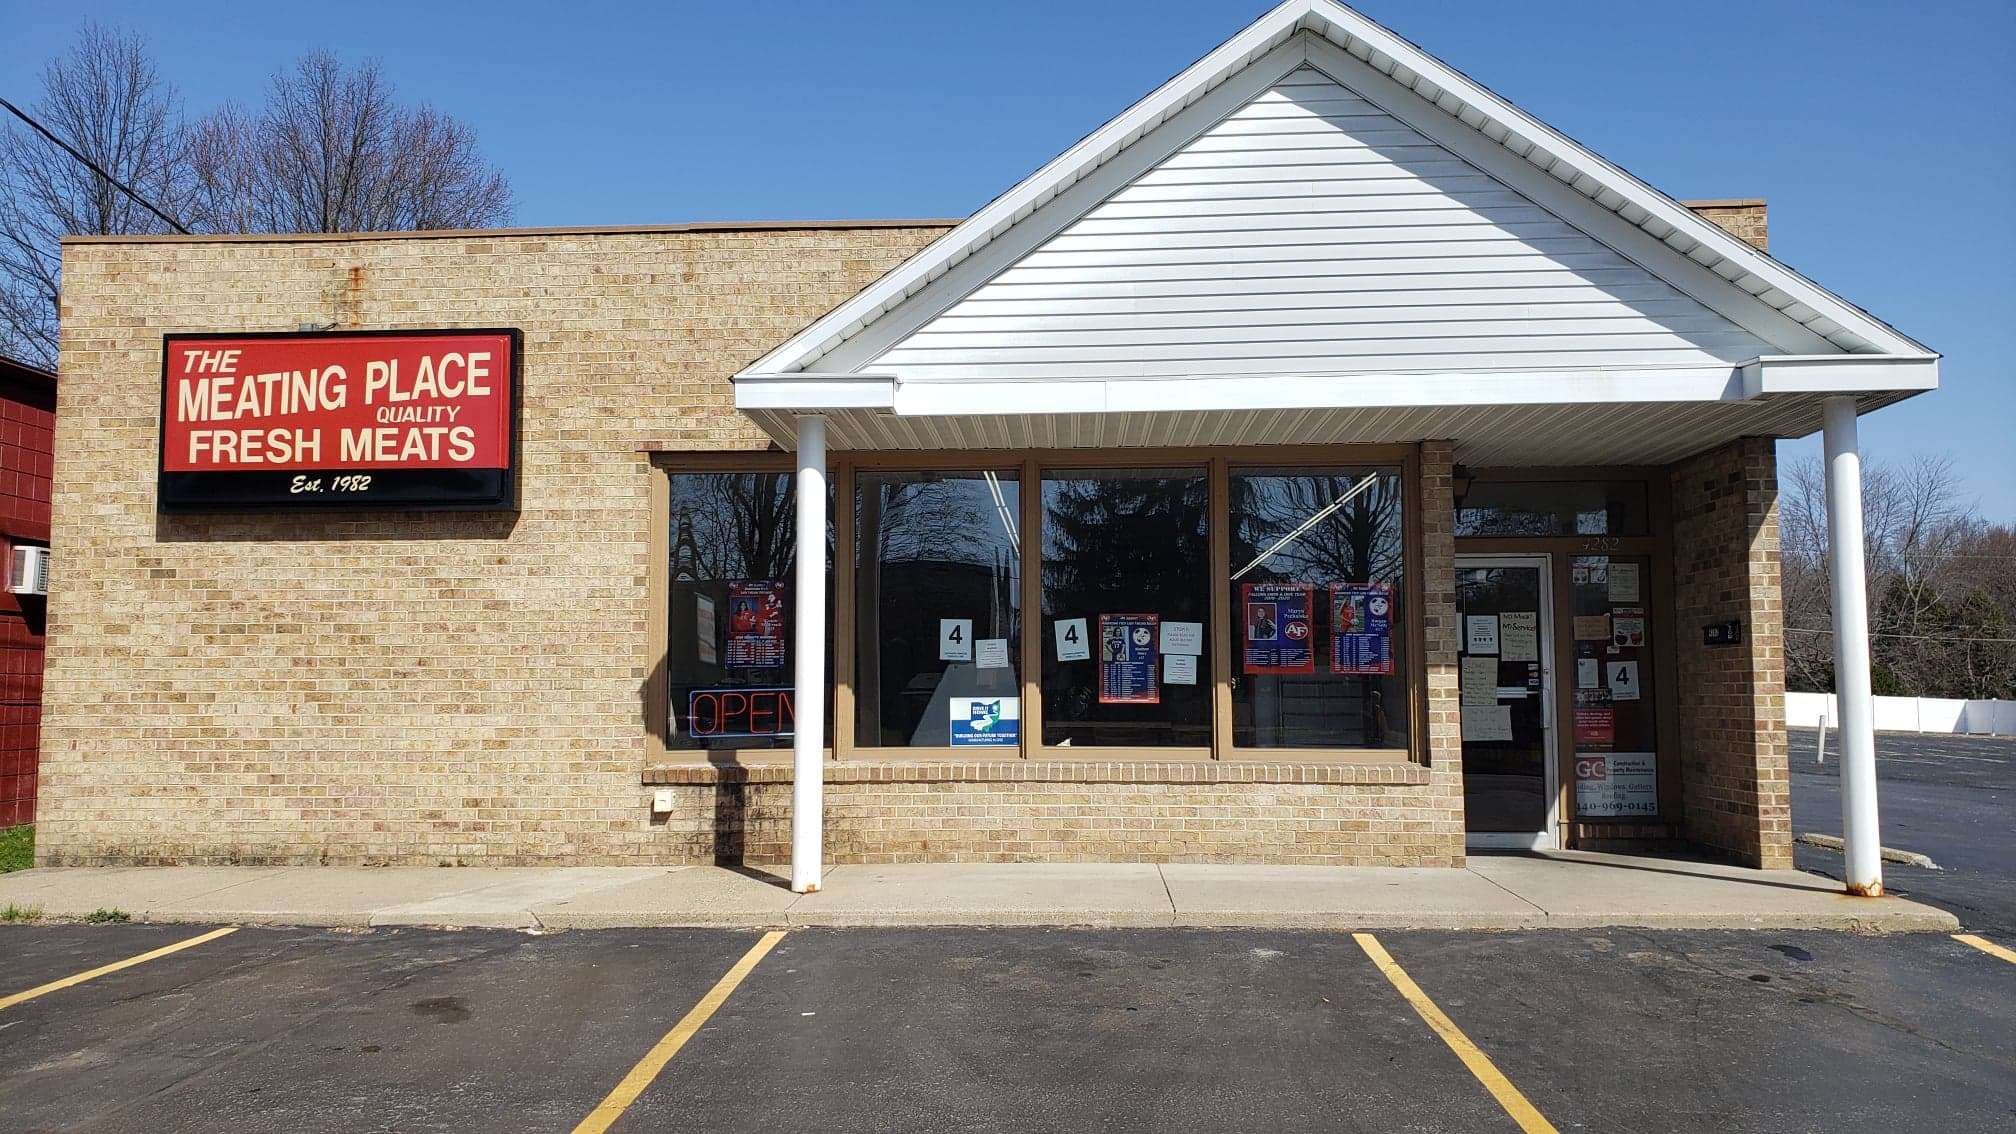 The Meating Place store front in Austintown, Ohio.